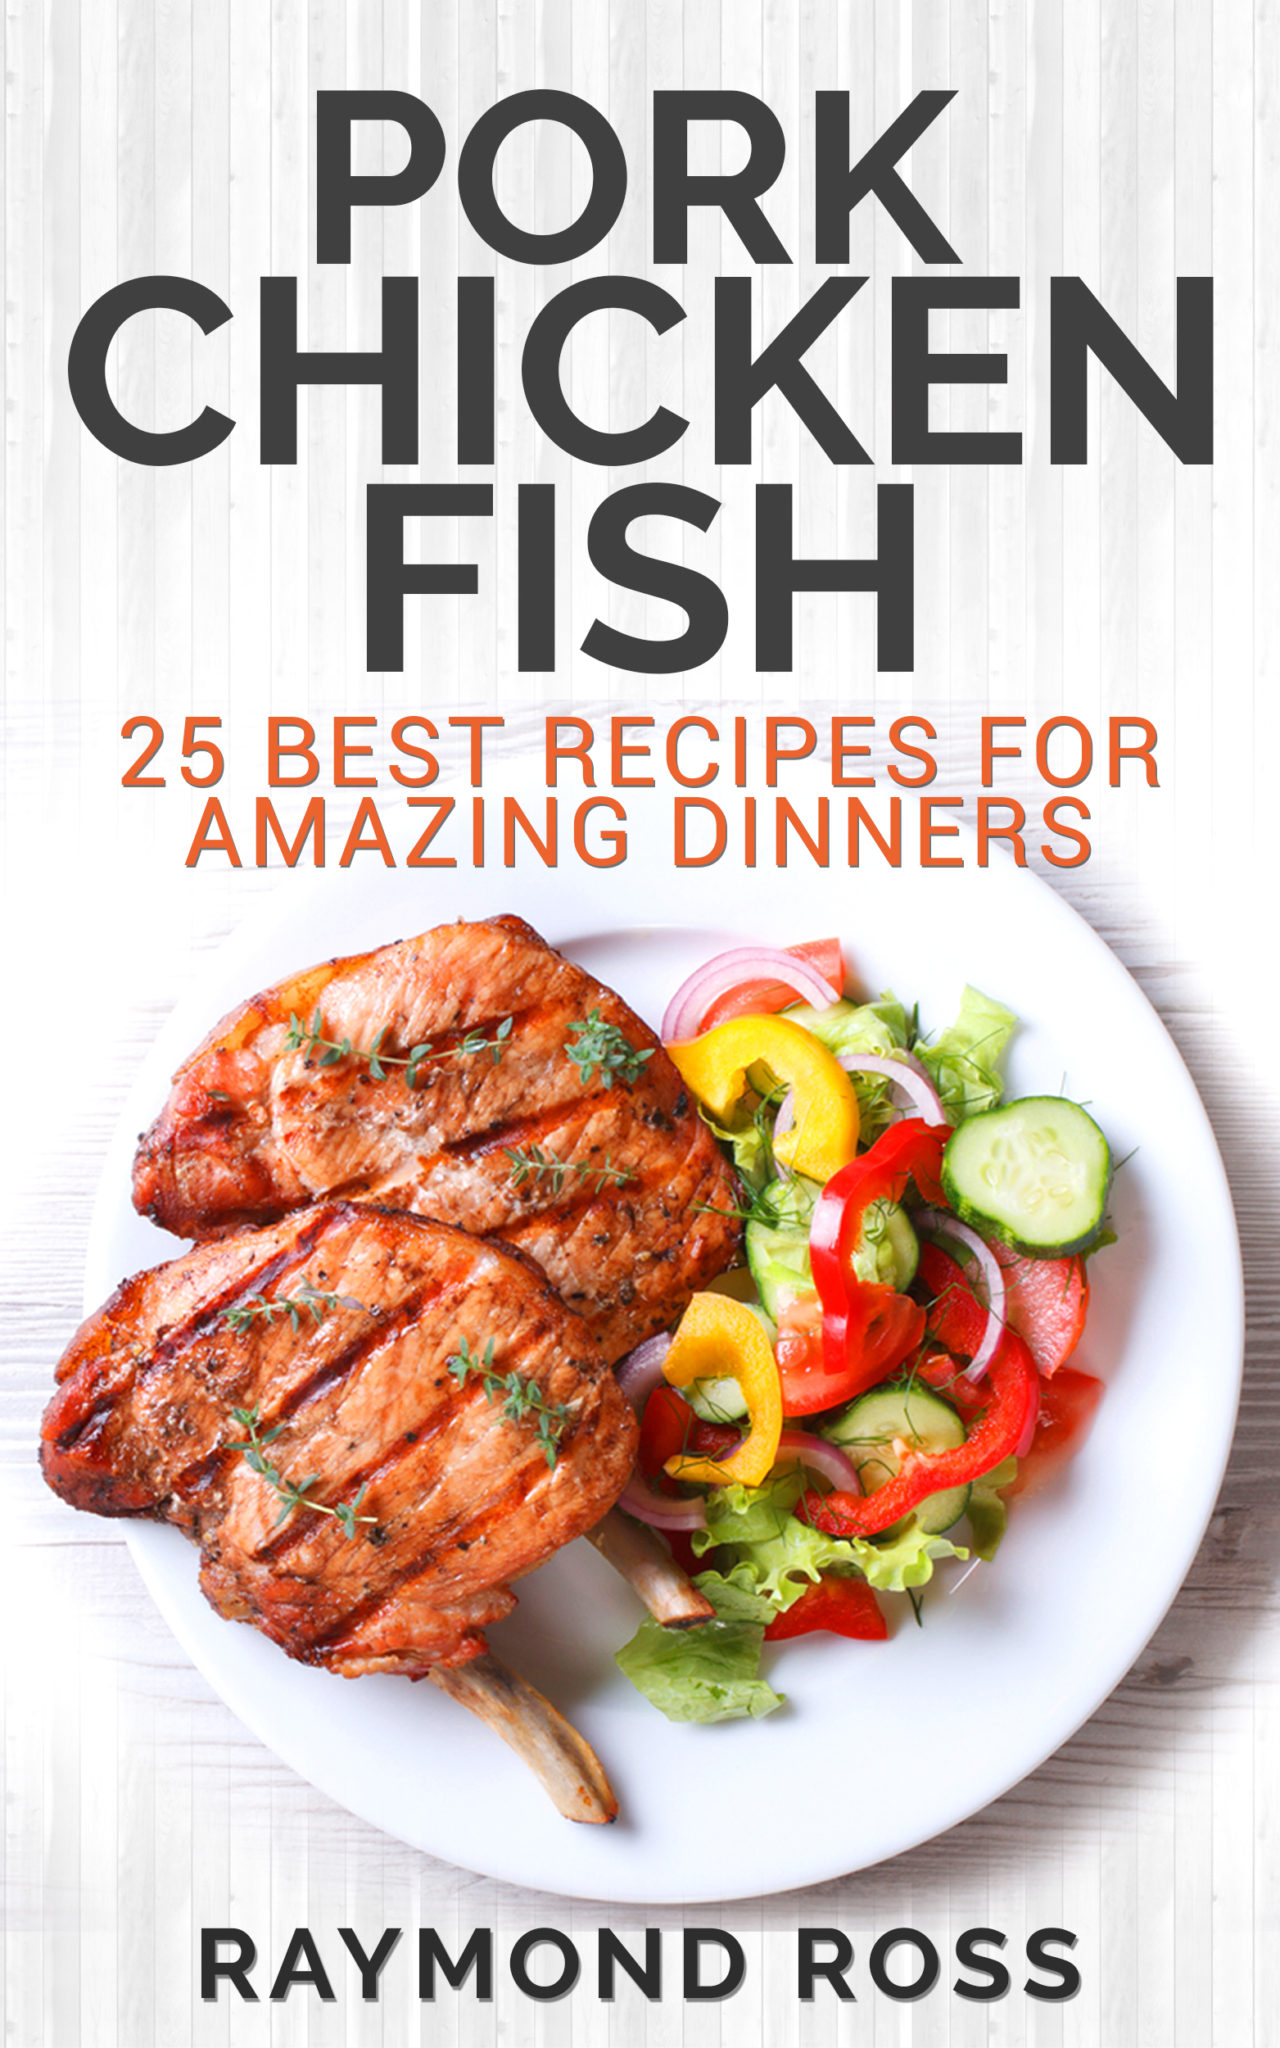 FREE: Pork. Chicken. Fish: 25 Best Recipes For Amazing Dinners by Raymond Ross